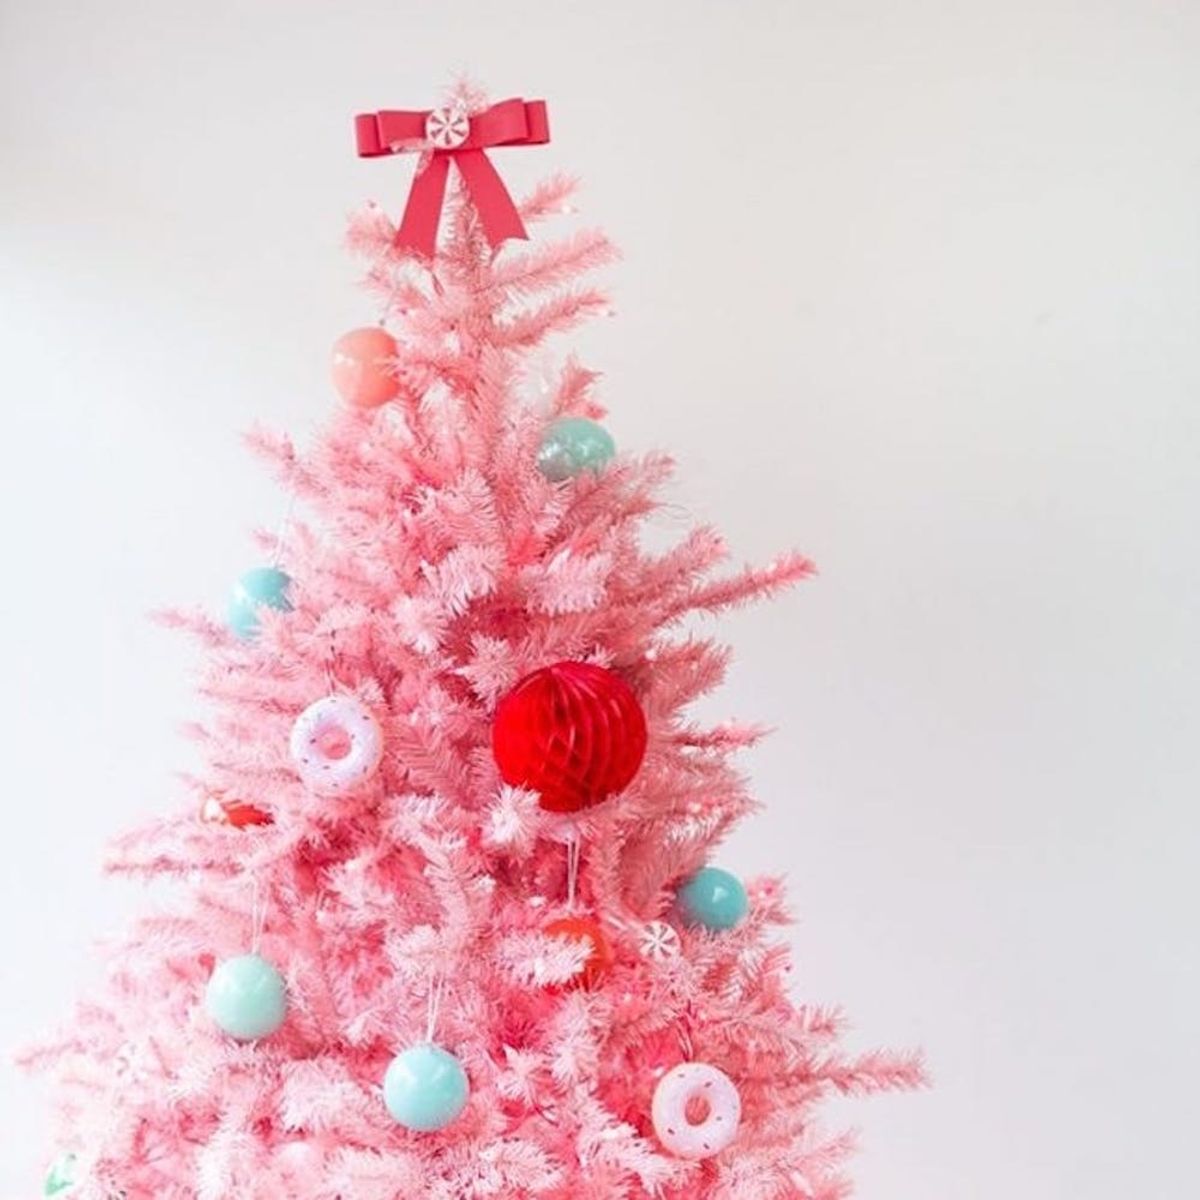 12 Colorful Christmas Trees That Go Way Beyond Red + Green